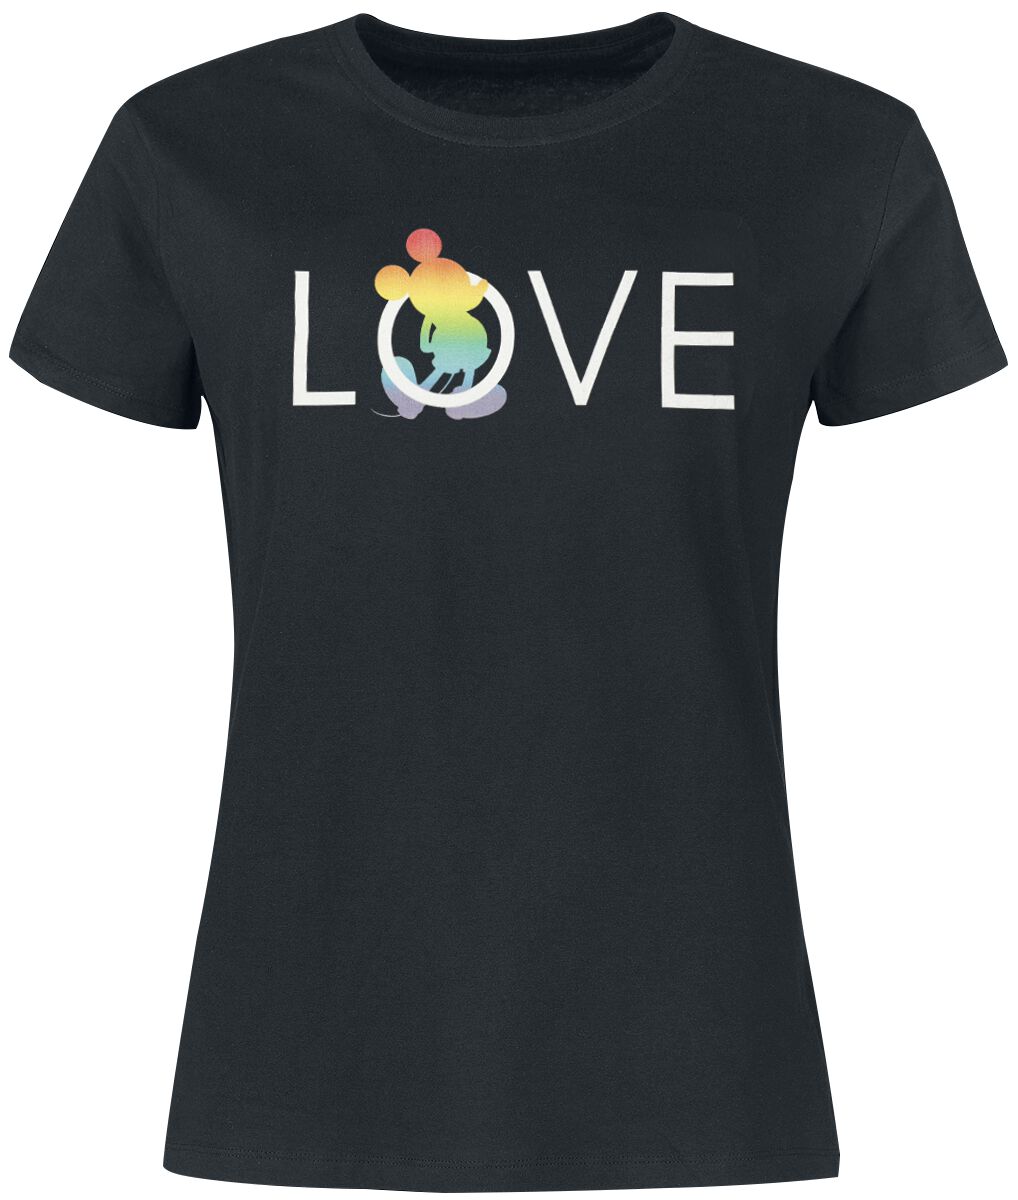 Mickey Mouse Love T-Shirt black product